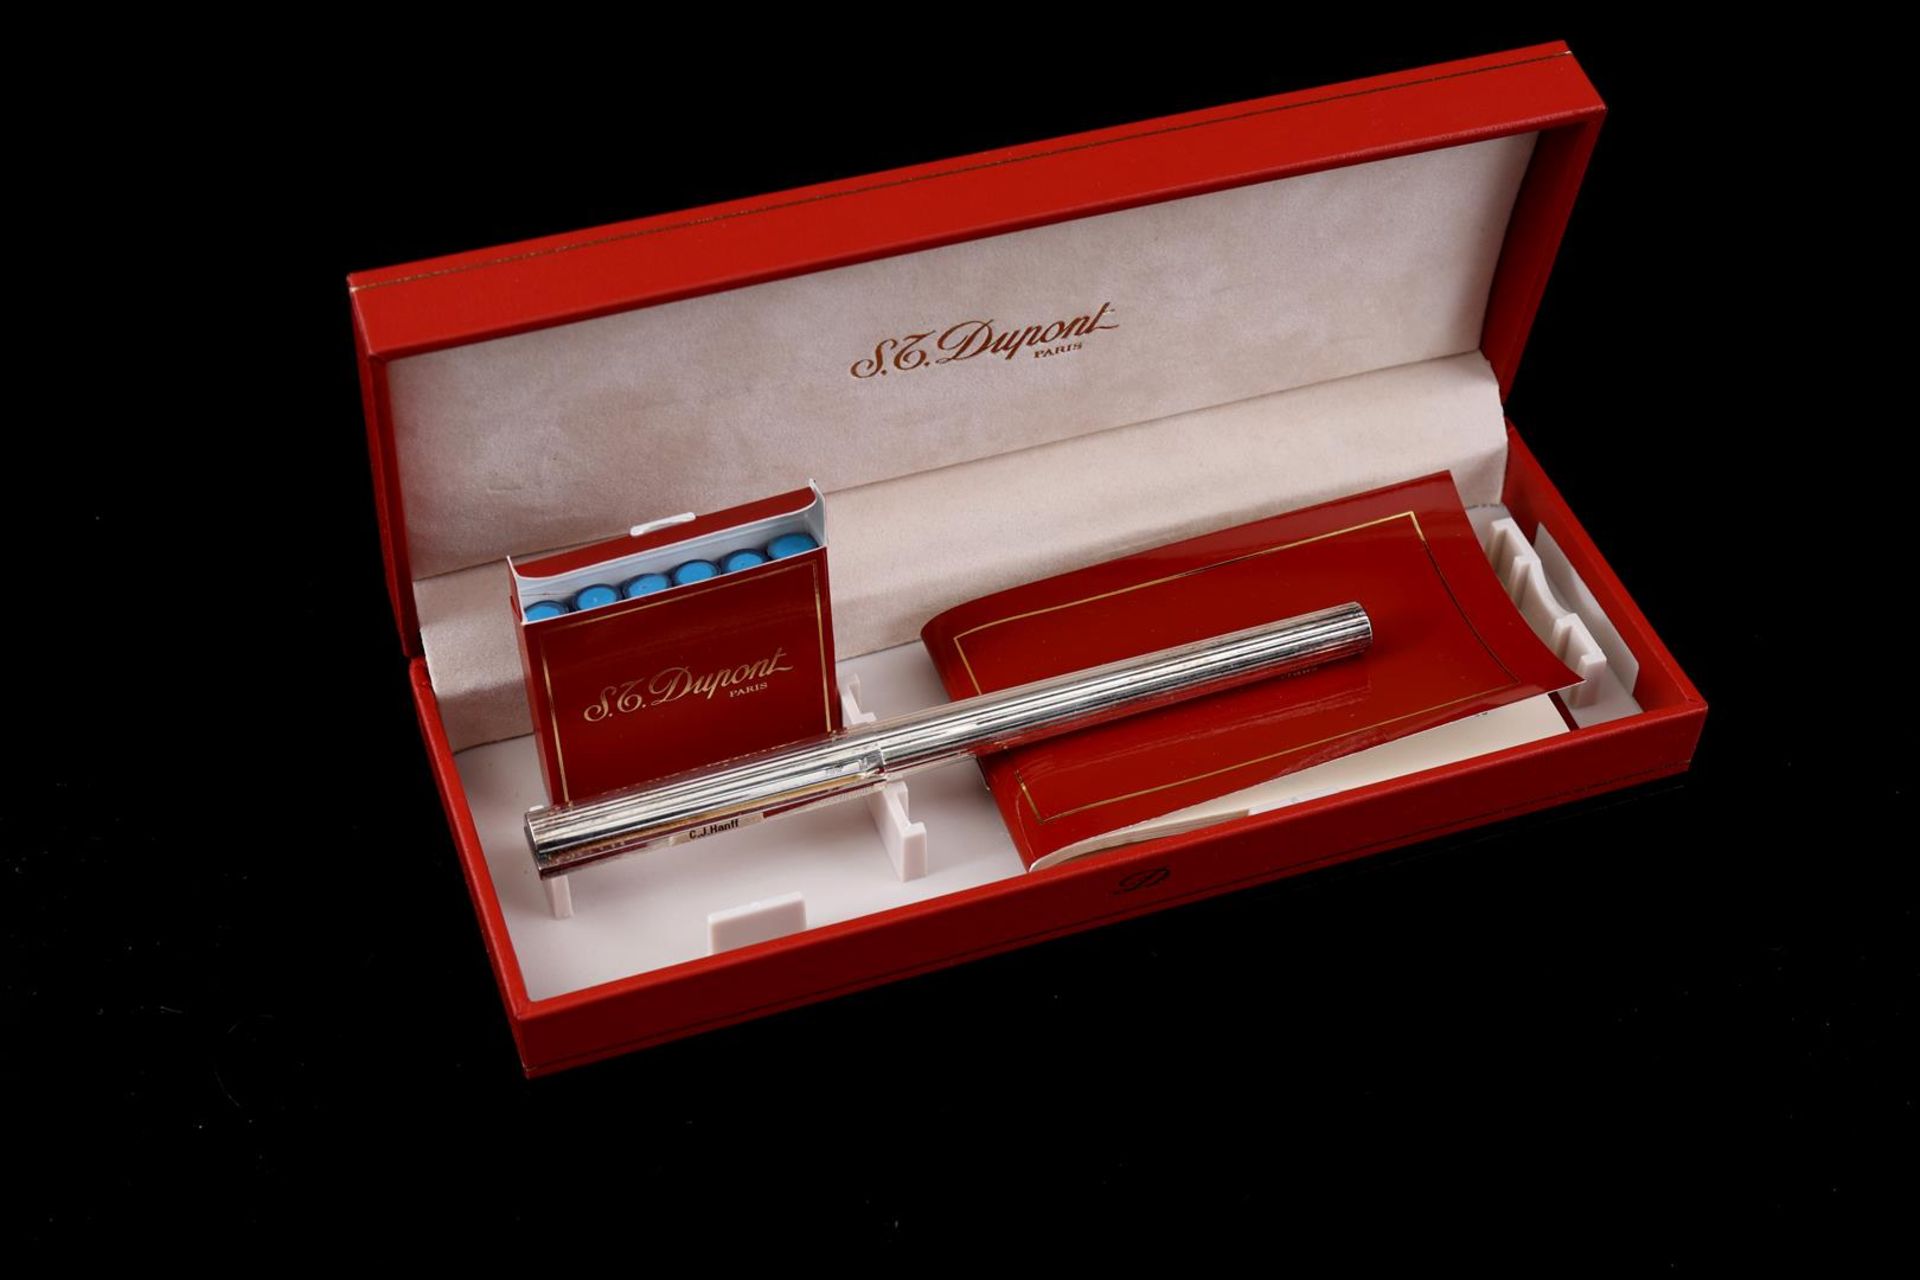 S.T. Dupont fountain pen